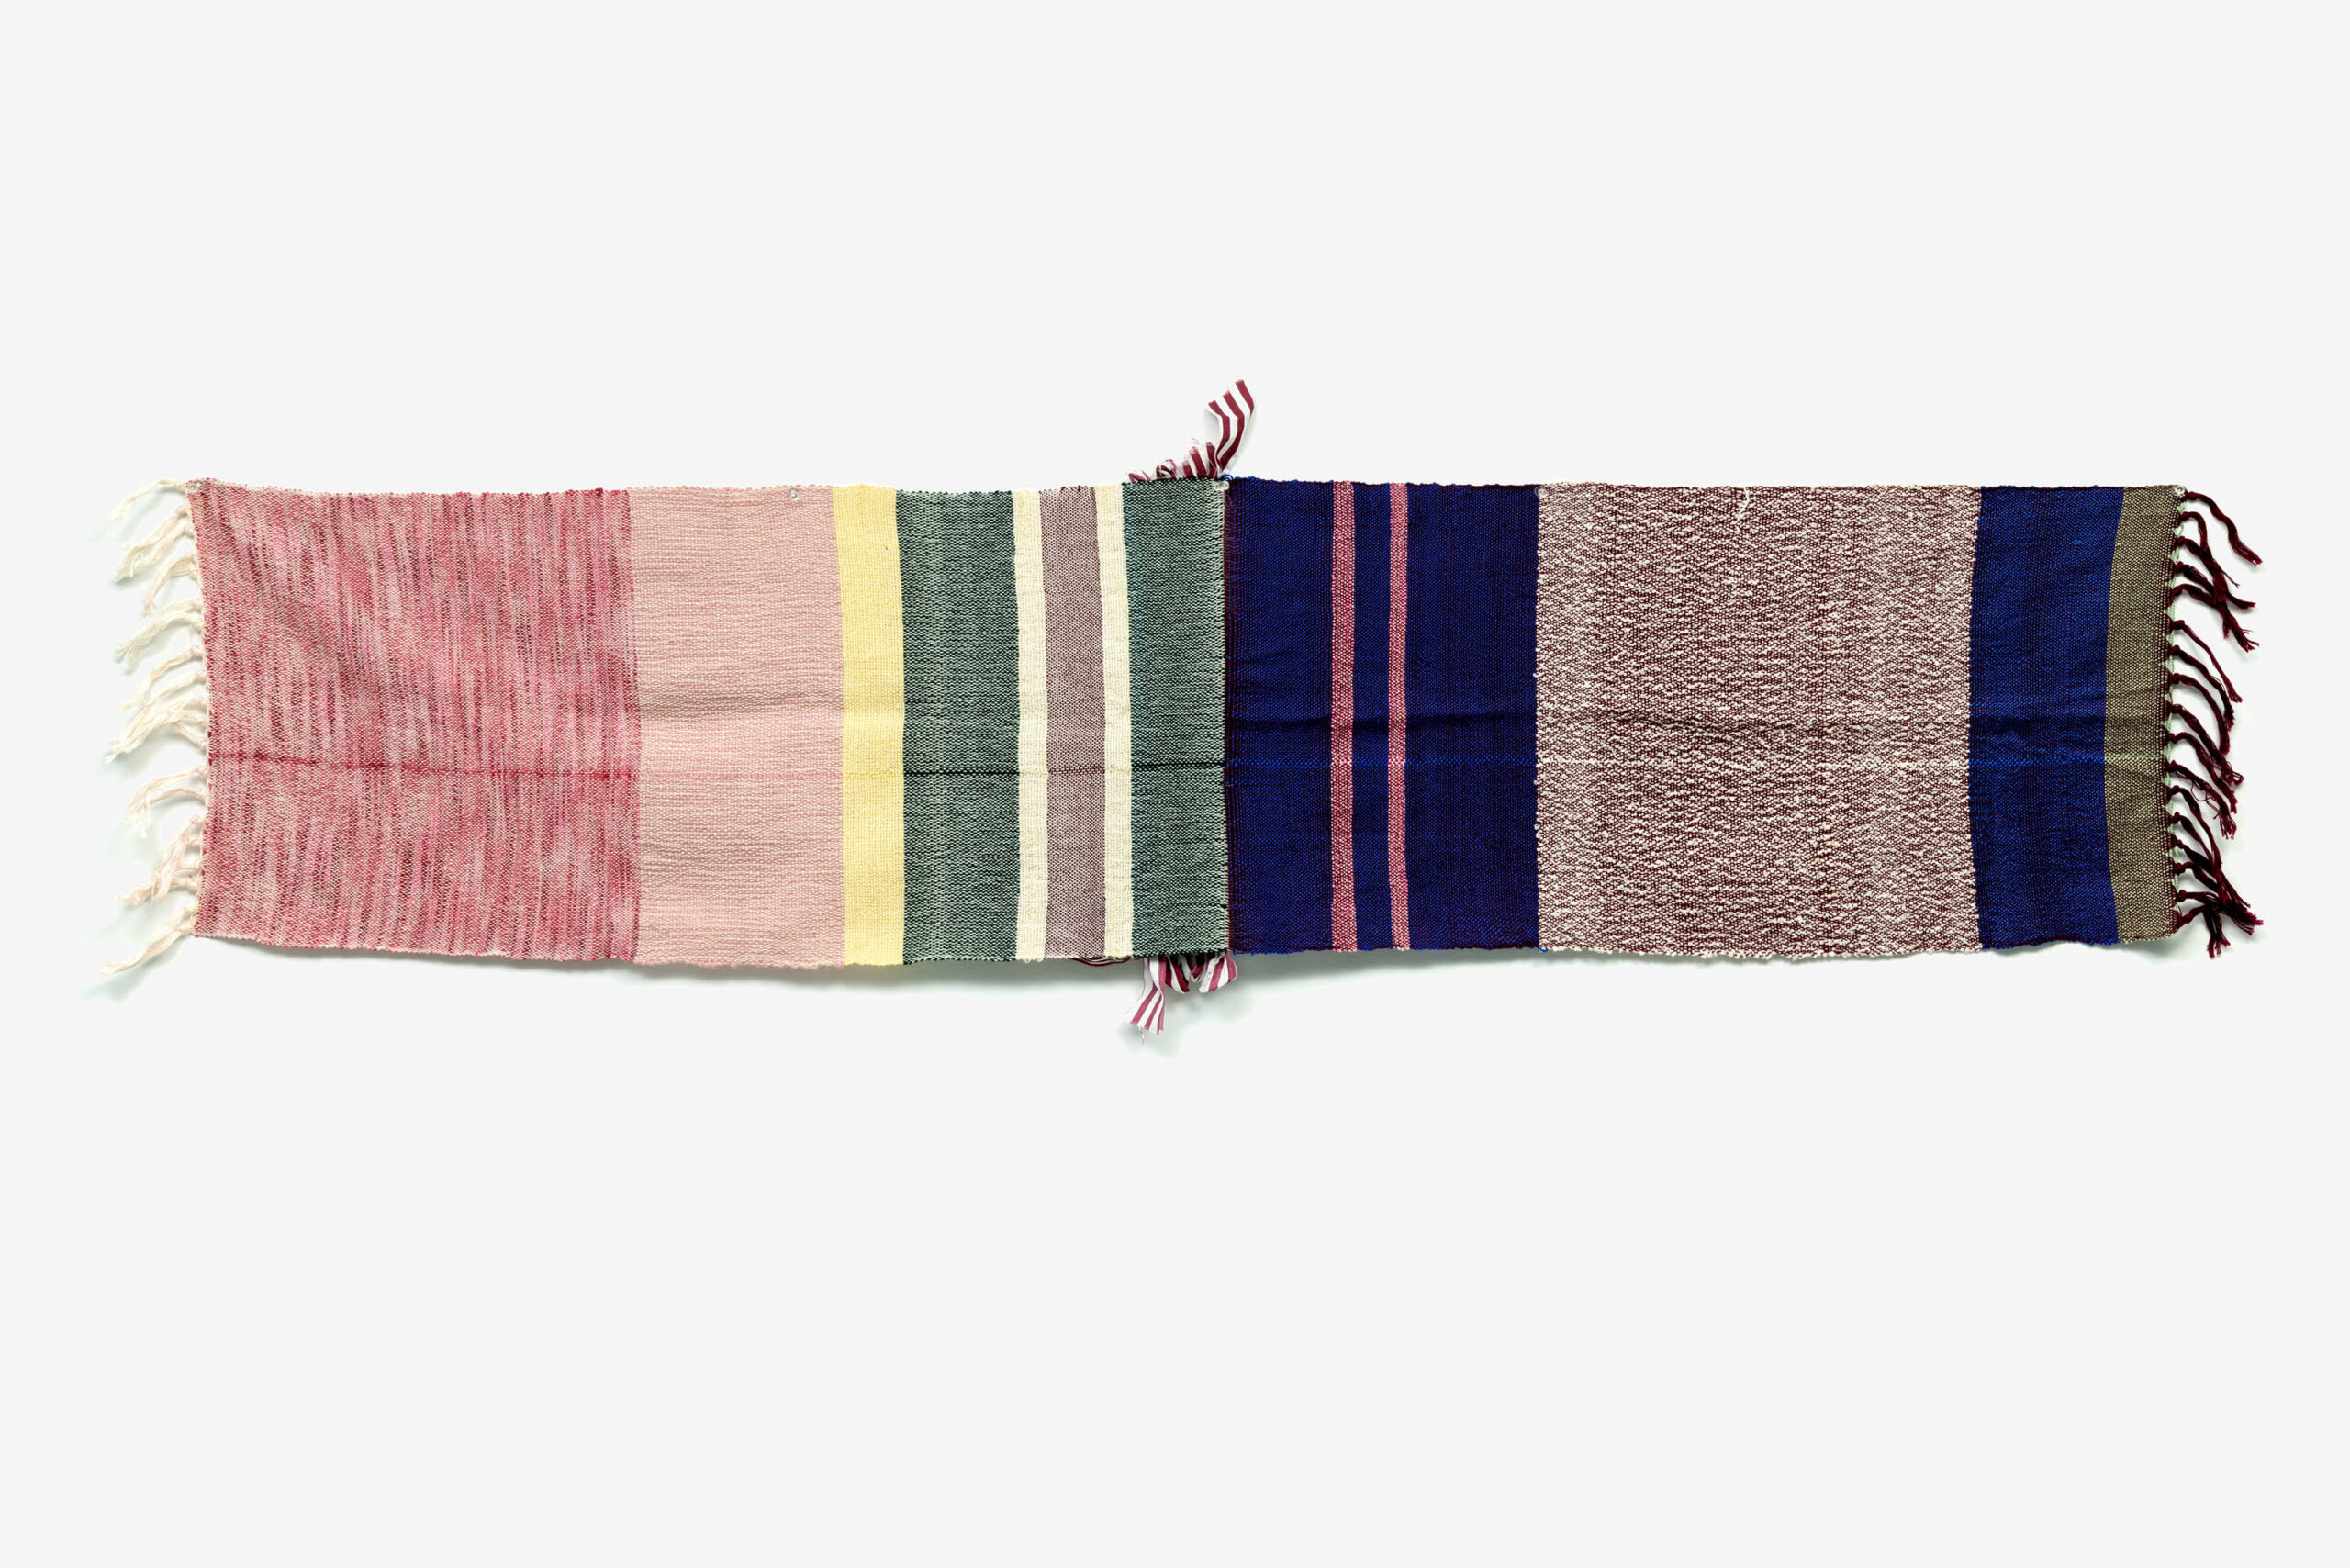 Woven cloth in pink, green, and blue stripes.